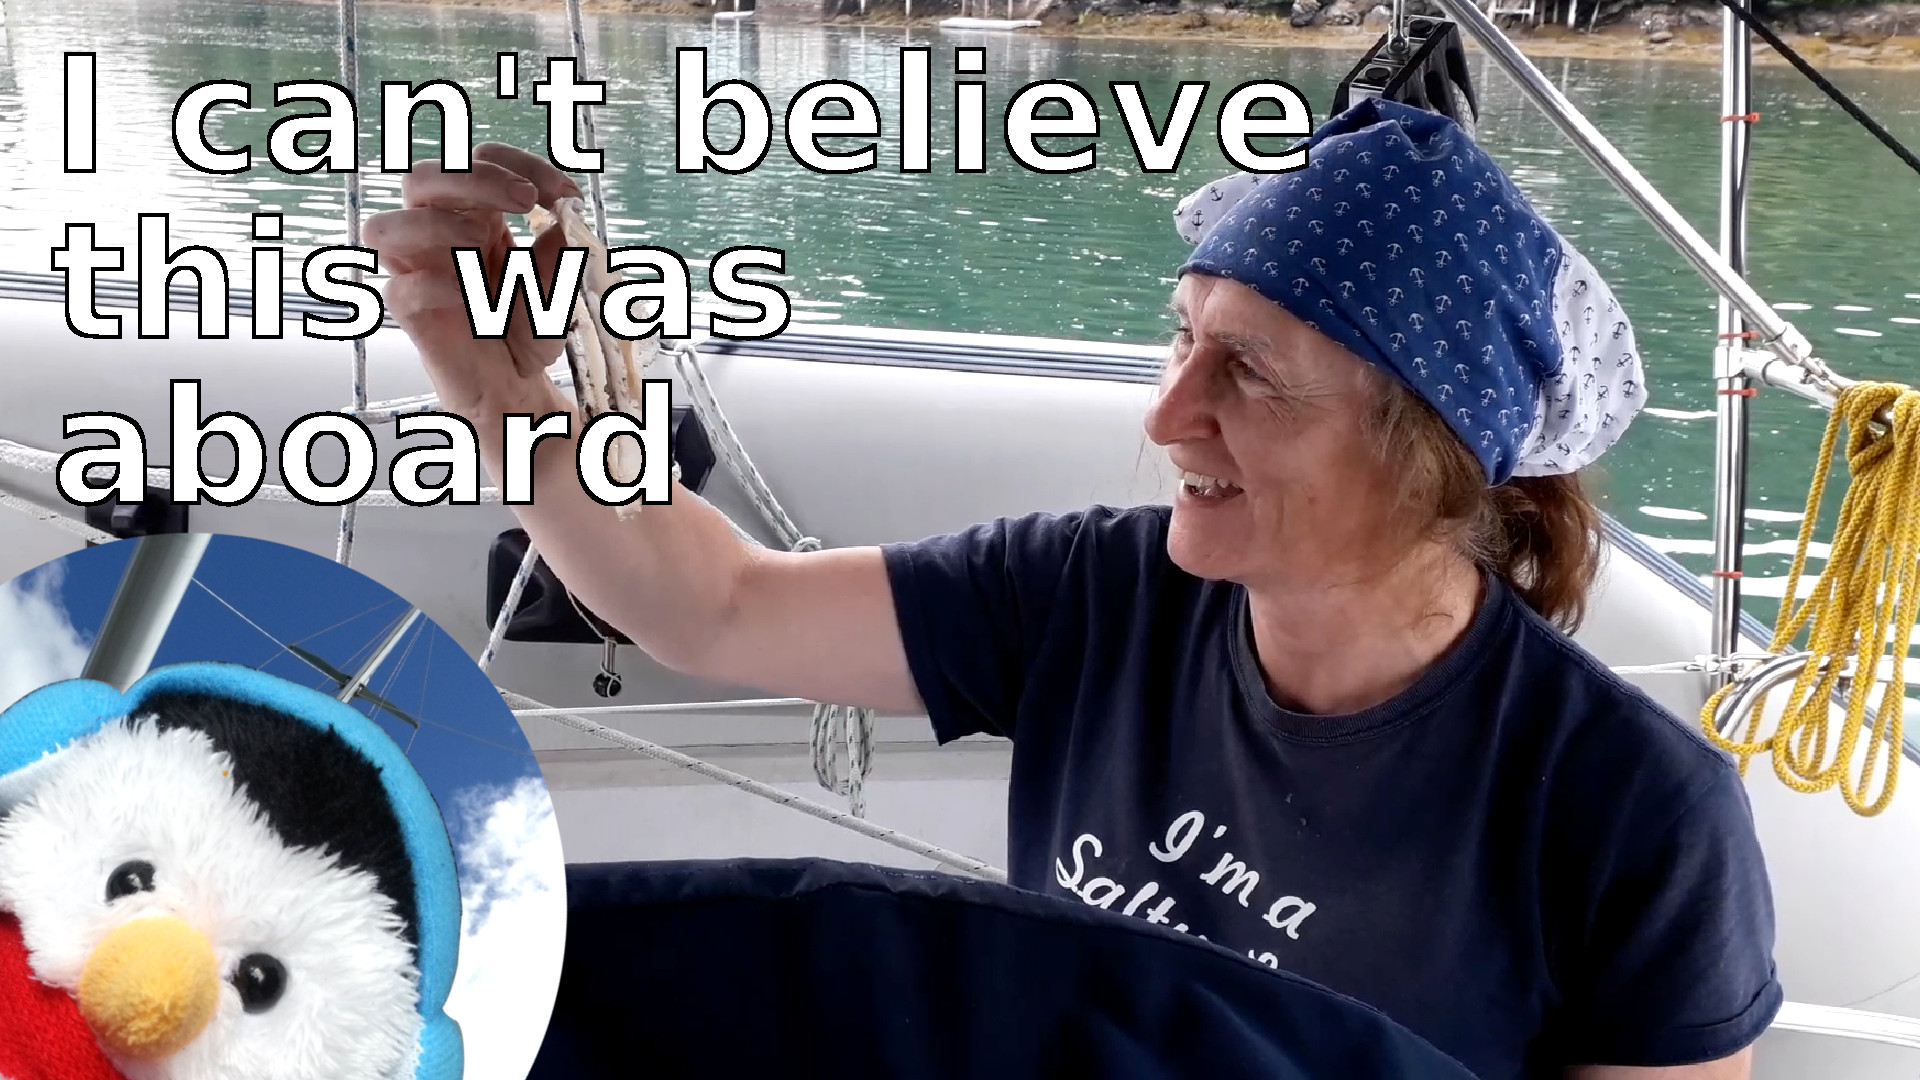 Watch our "I can't believe this was aboard" and add comments etc.